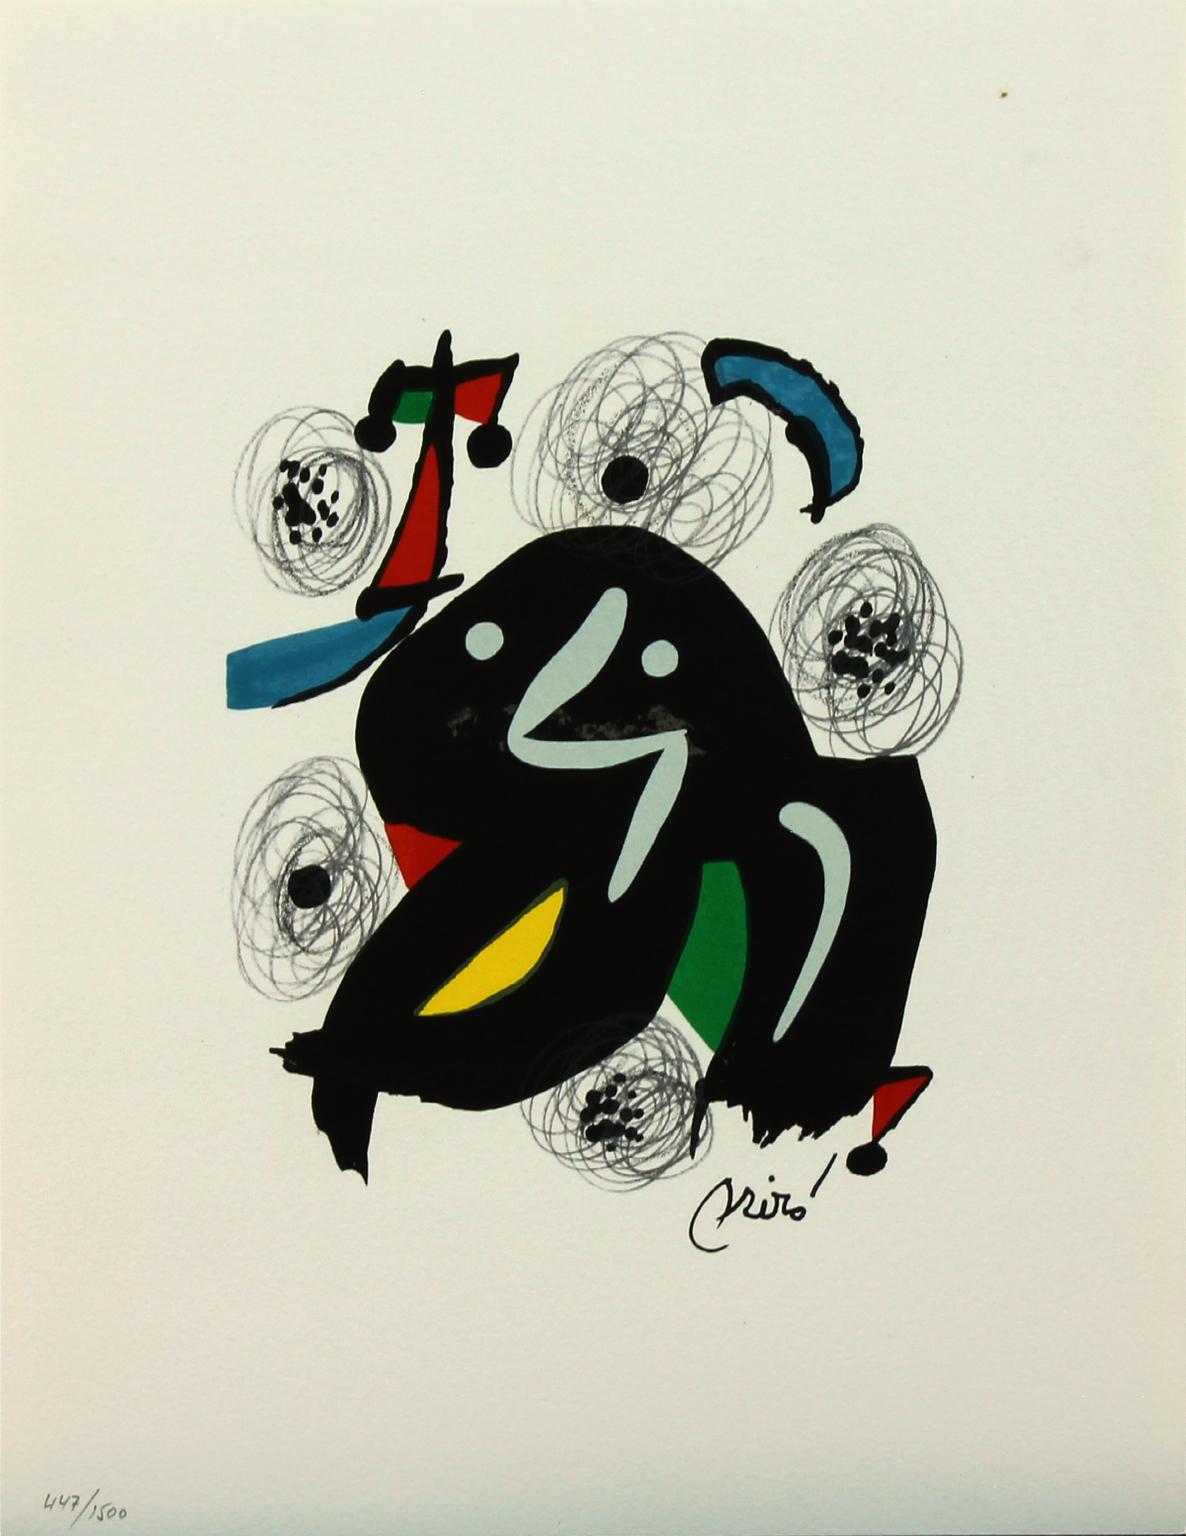 "Melodie #4" color lithograph from "La Mélodie Acide" portfolio by Joan Miró. Published by Poligrafa. Plate-signed Miró on front. Edition number 447 of 1500 hand-numbered in pencil on front. Titled "Melodie #4" on back in pencil. Unframed/never